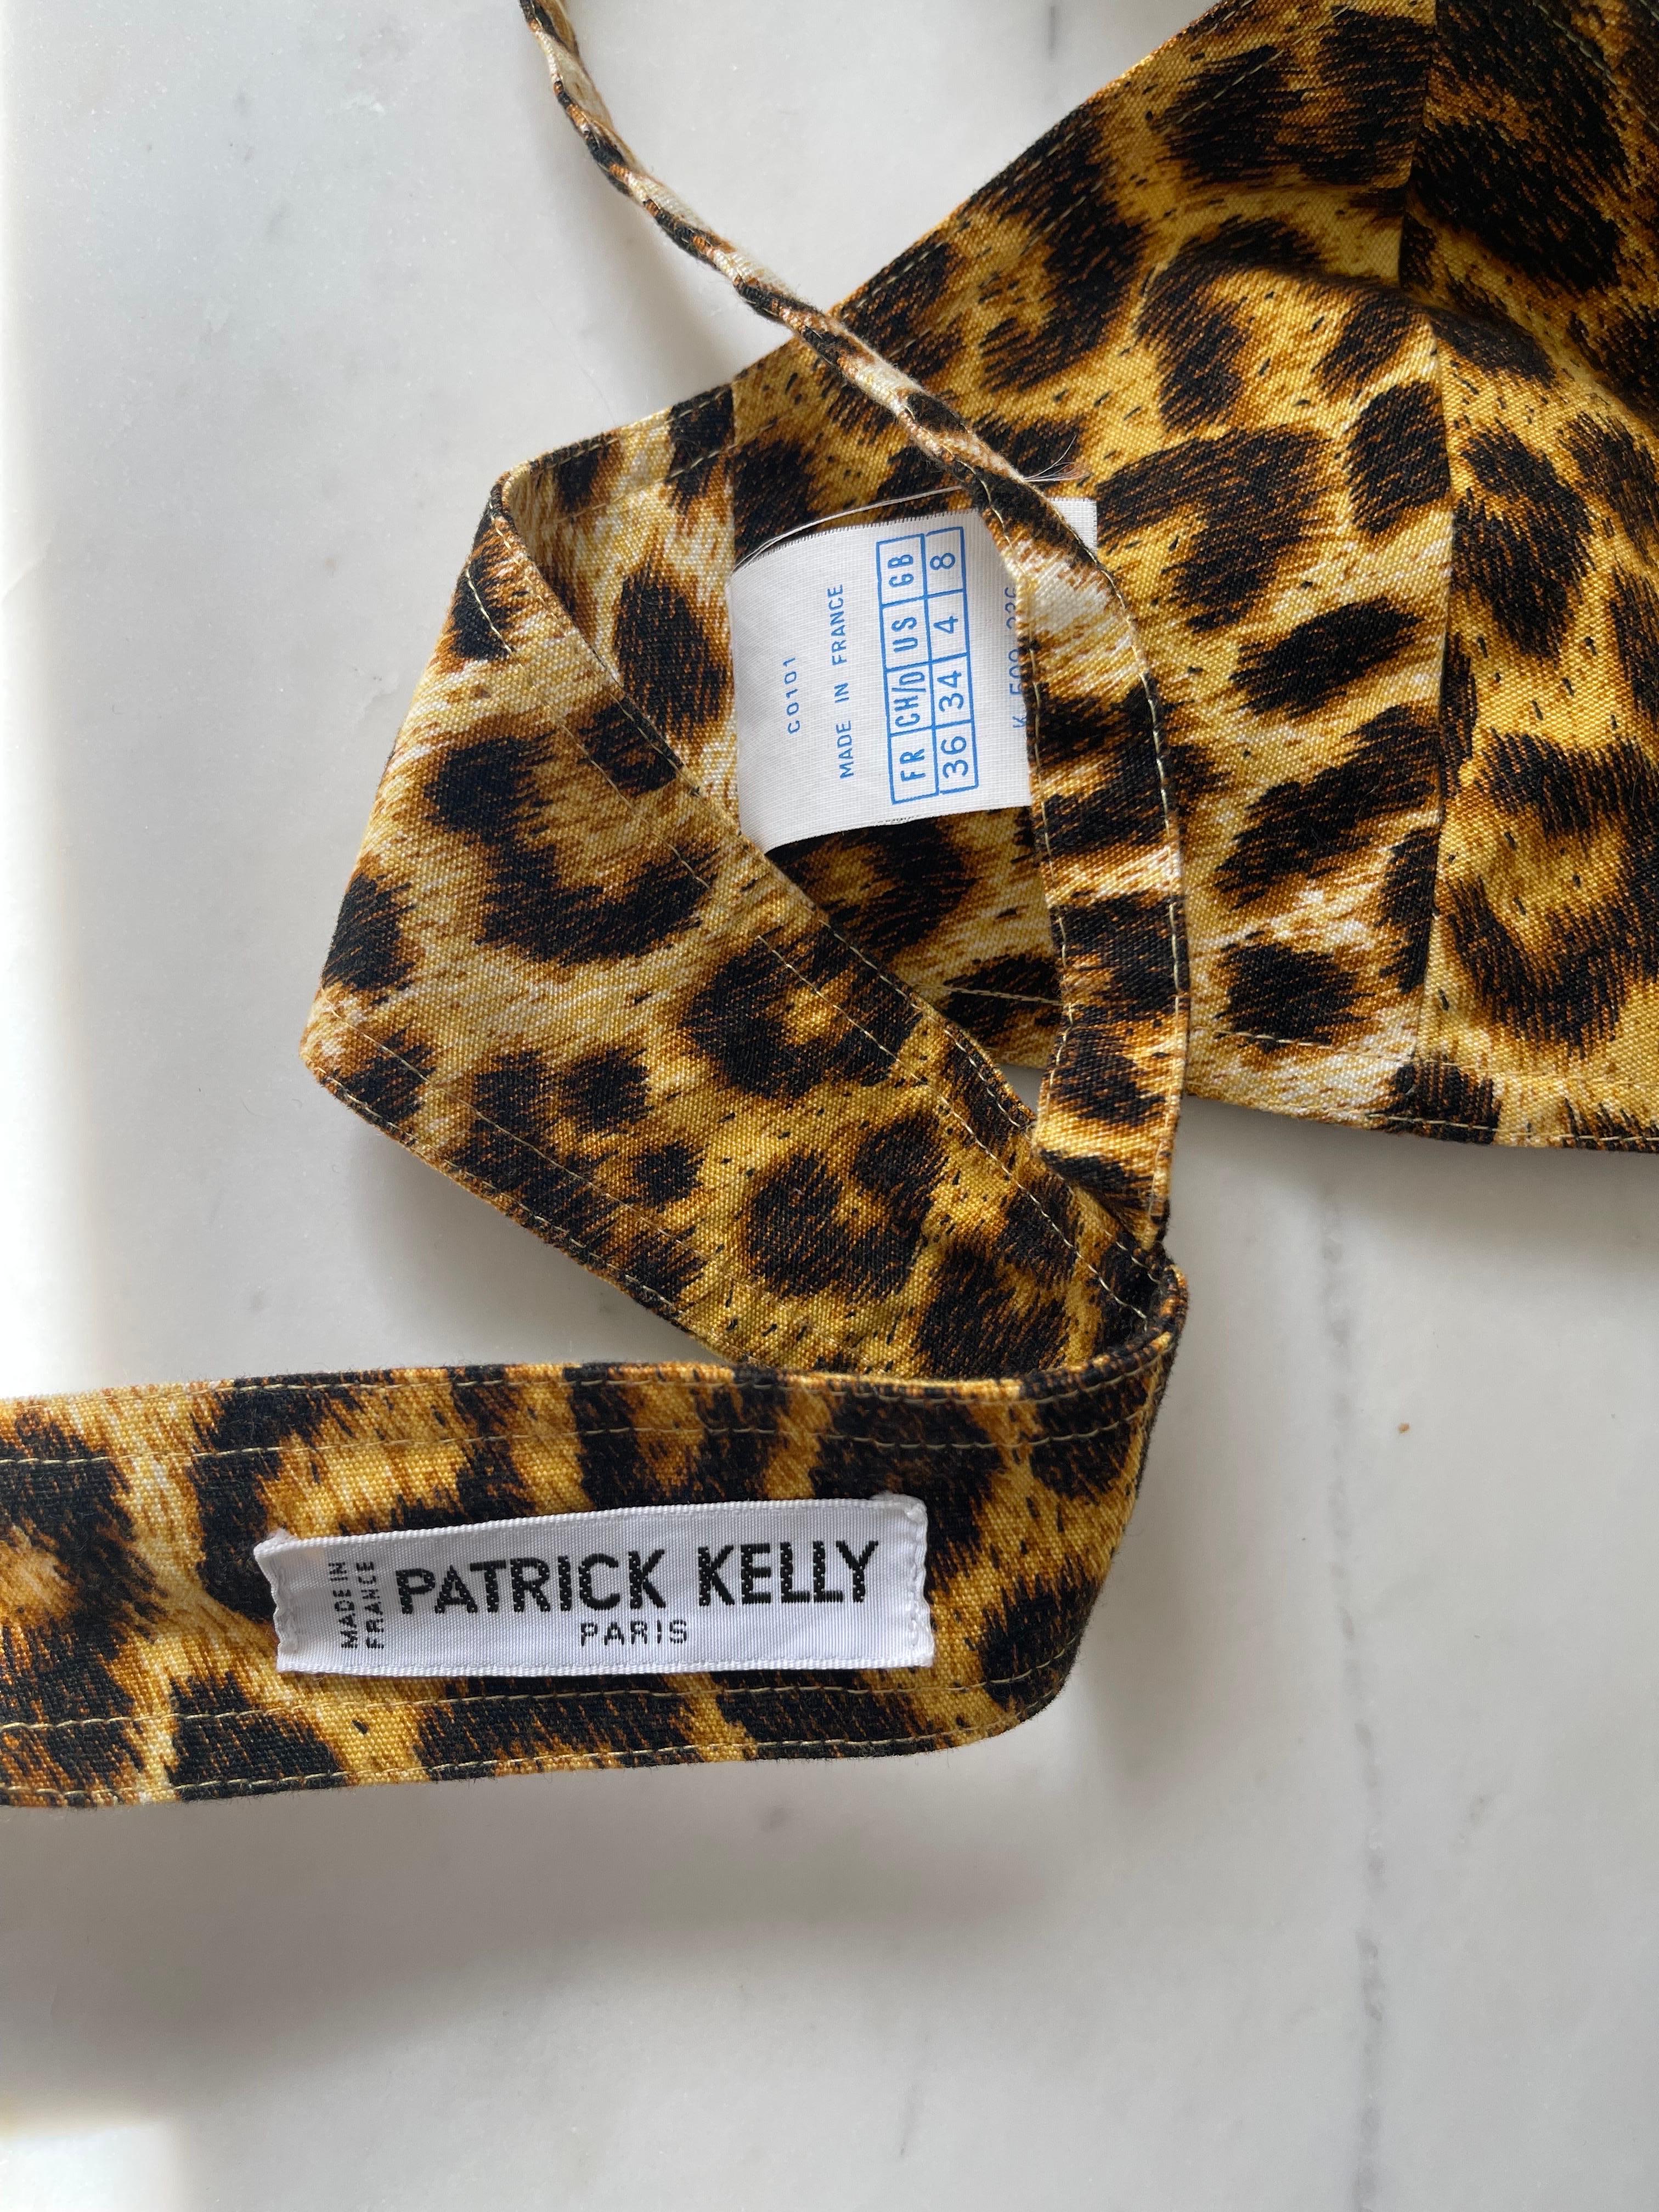 Extremely rare 1980s PATRICK KELLY Paris leopard animal cotton print bra / crop top ! Classic animal print. Ties at the center back. Wear alone or layered under a blazer, cardigan. 
In great unworn condition 
Made in France
Marked Size US